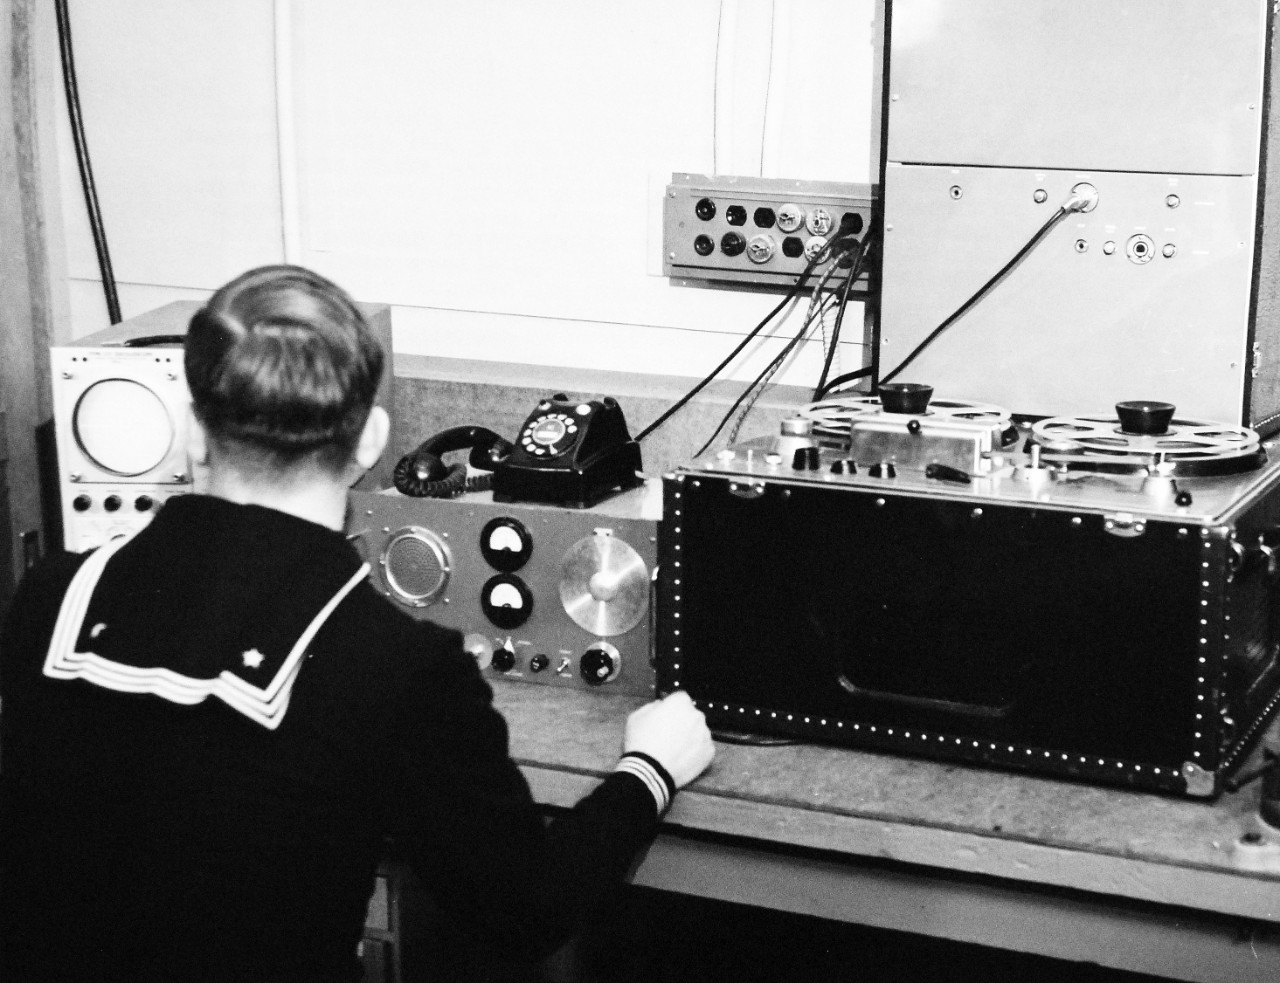 330-PS-8850-8:  U.S. Navy Conducts Physical Studies By Telephone.  Electronics Technician John J. Rhinehart, USN, manning a typical shore-based receiving unit for the transmission of physiological information by radio or telephone, March 21, 1958.  Official Department of Defense photograph, now in the collection of the National Archives.   